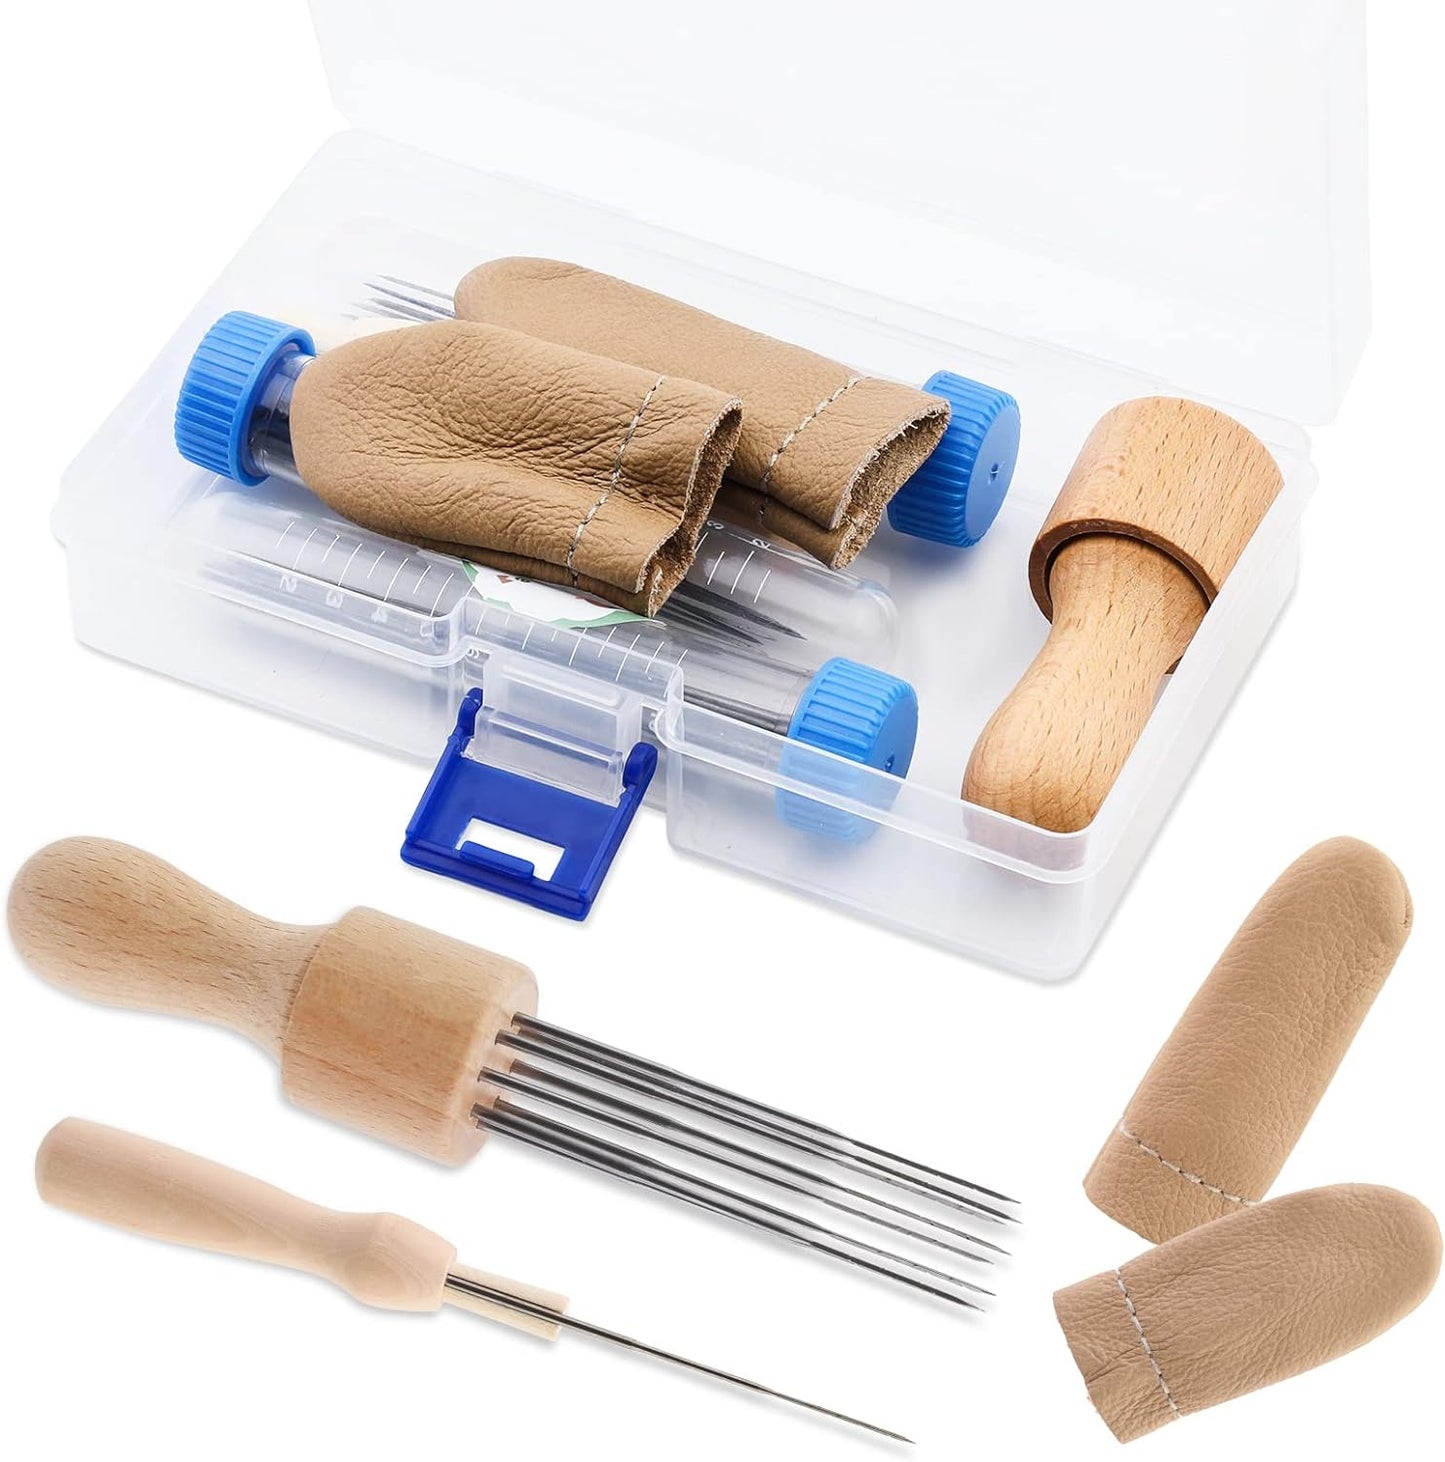 Needle Felting Tools, Needle Felting Supplies, Needle Felting Kit with 3 Size 30Pcs Needles Felting Needles,Wooden Handle, Finger Cots, Perfect for DIY Felting Wool Projects